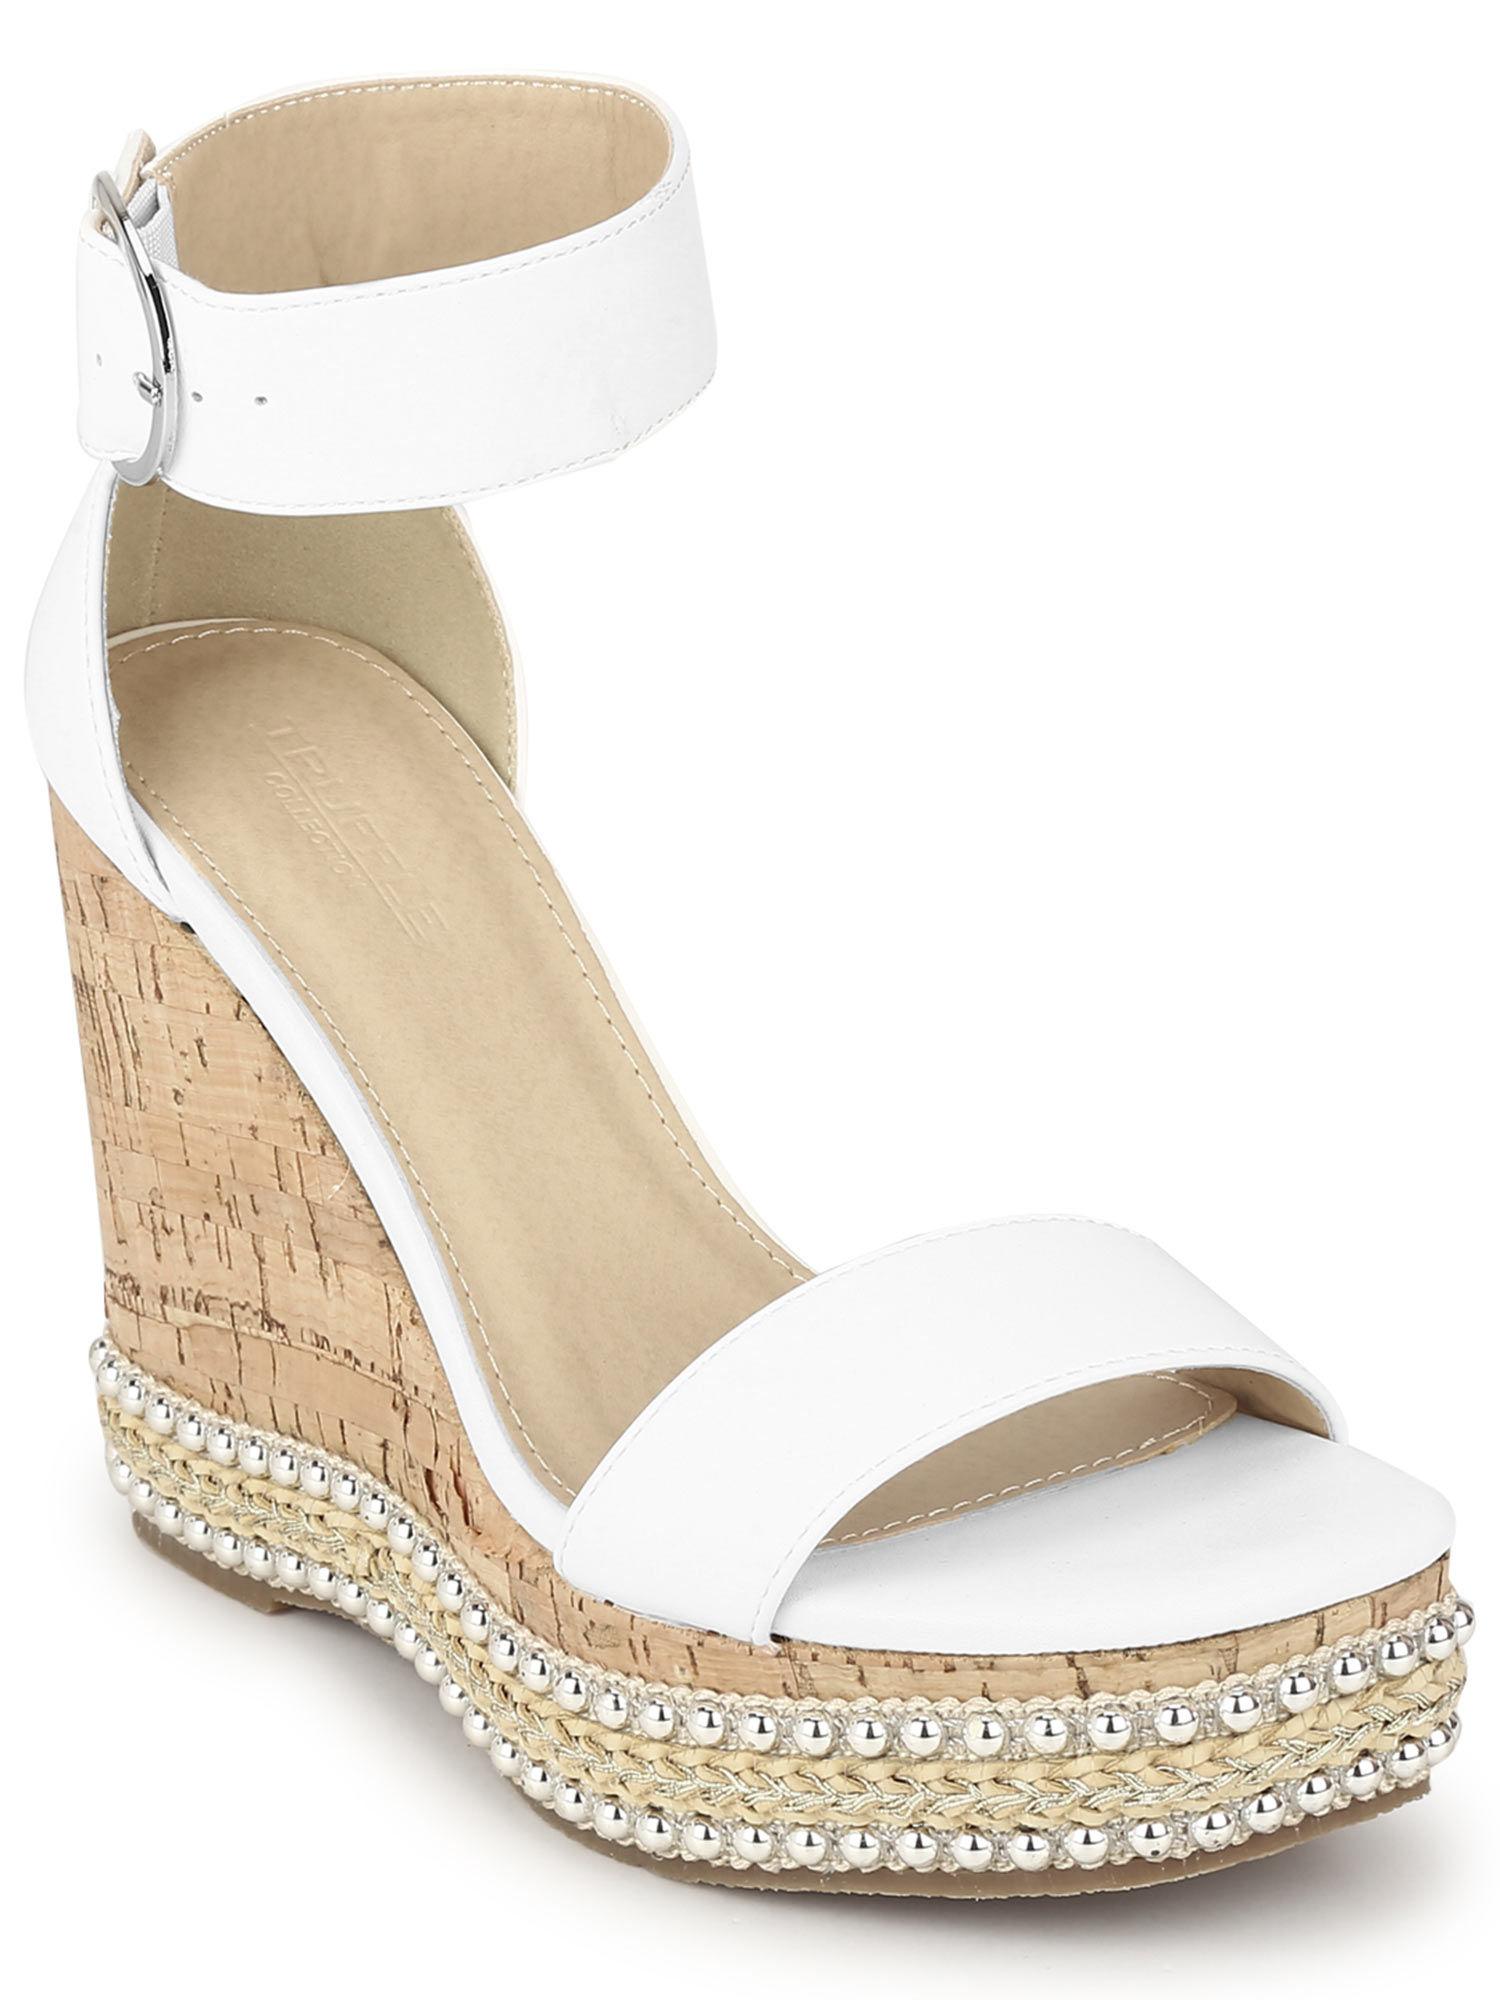 white solid wedges